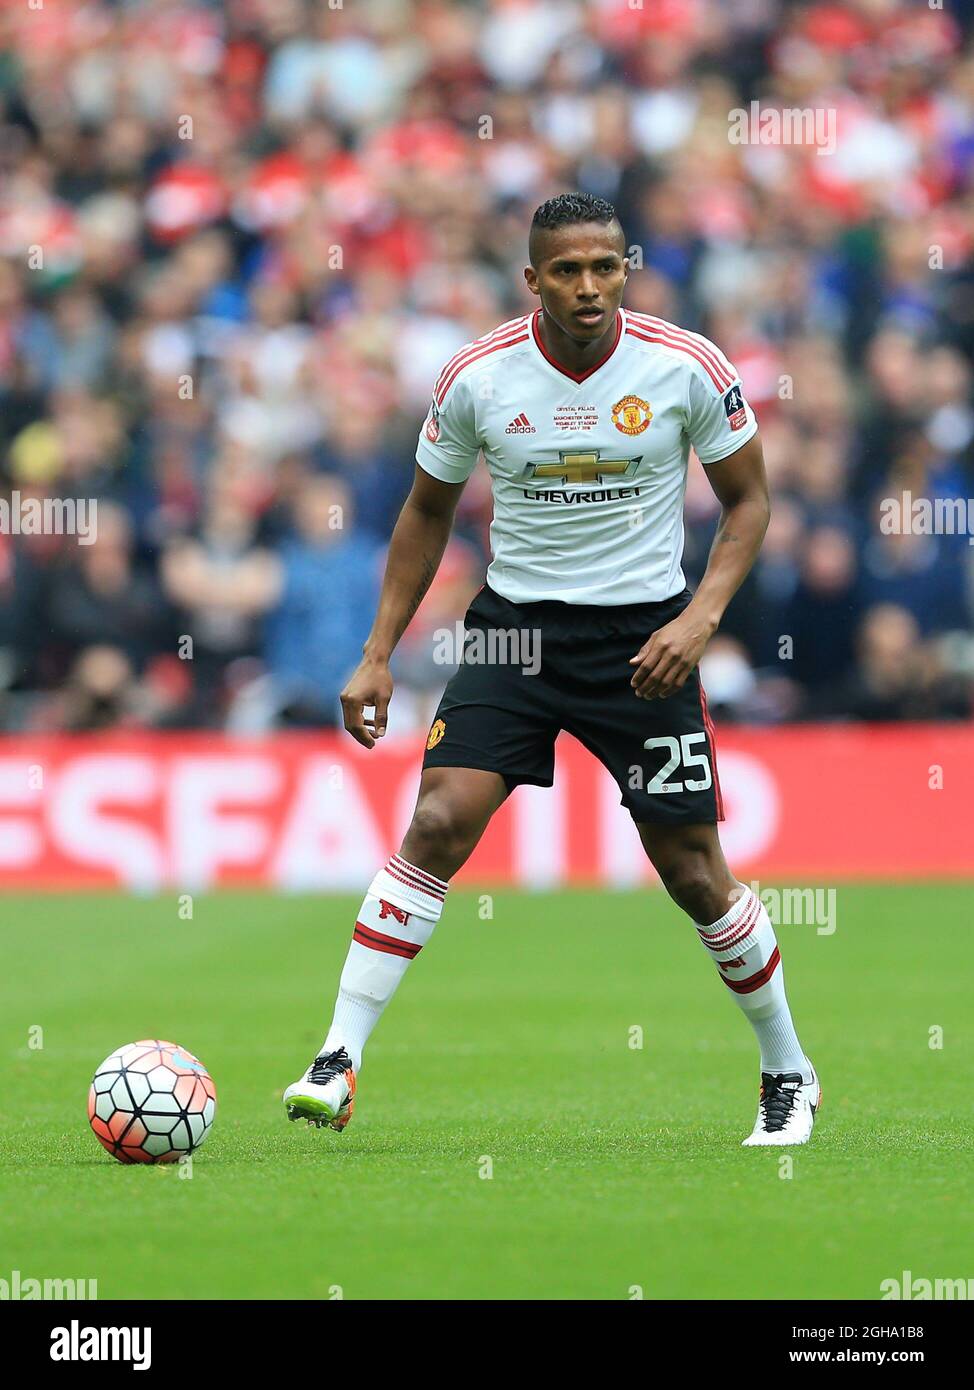 Manchester United's Antonio Valencia in action during the Emirates FA Cup Final match at Wembley Stadium.  Photo credit should read: David Klein/Sportimage via PA Images Stock Photo